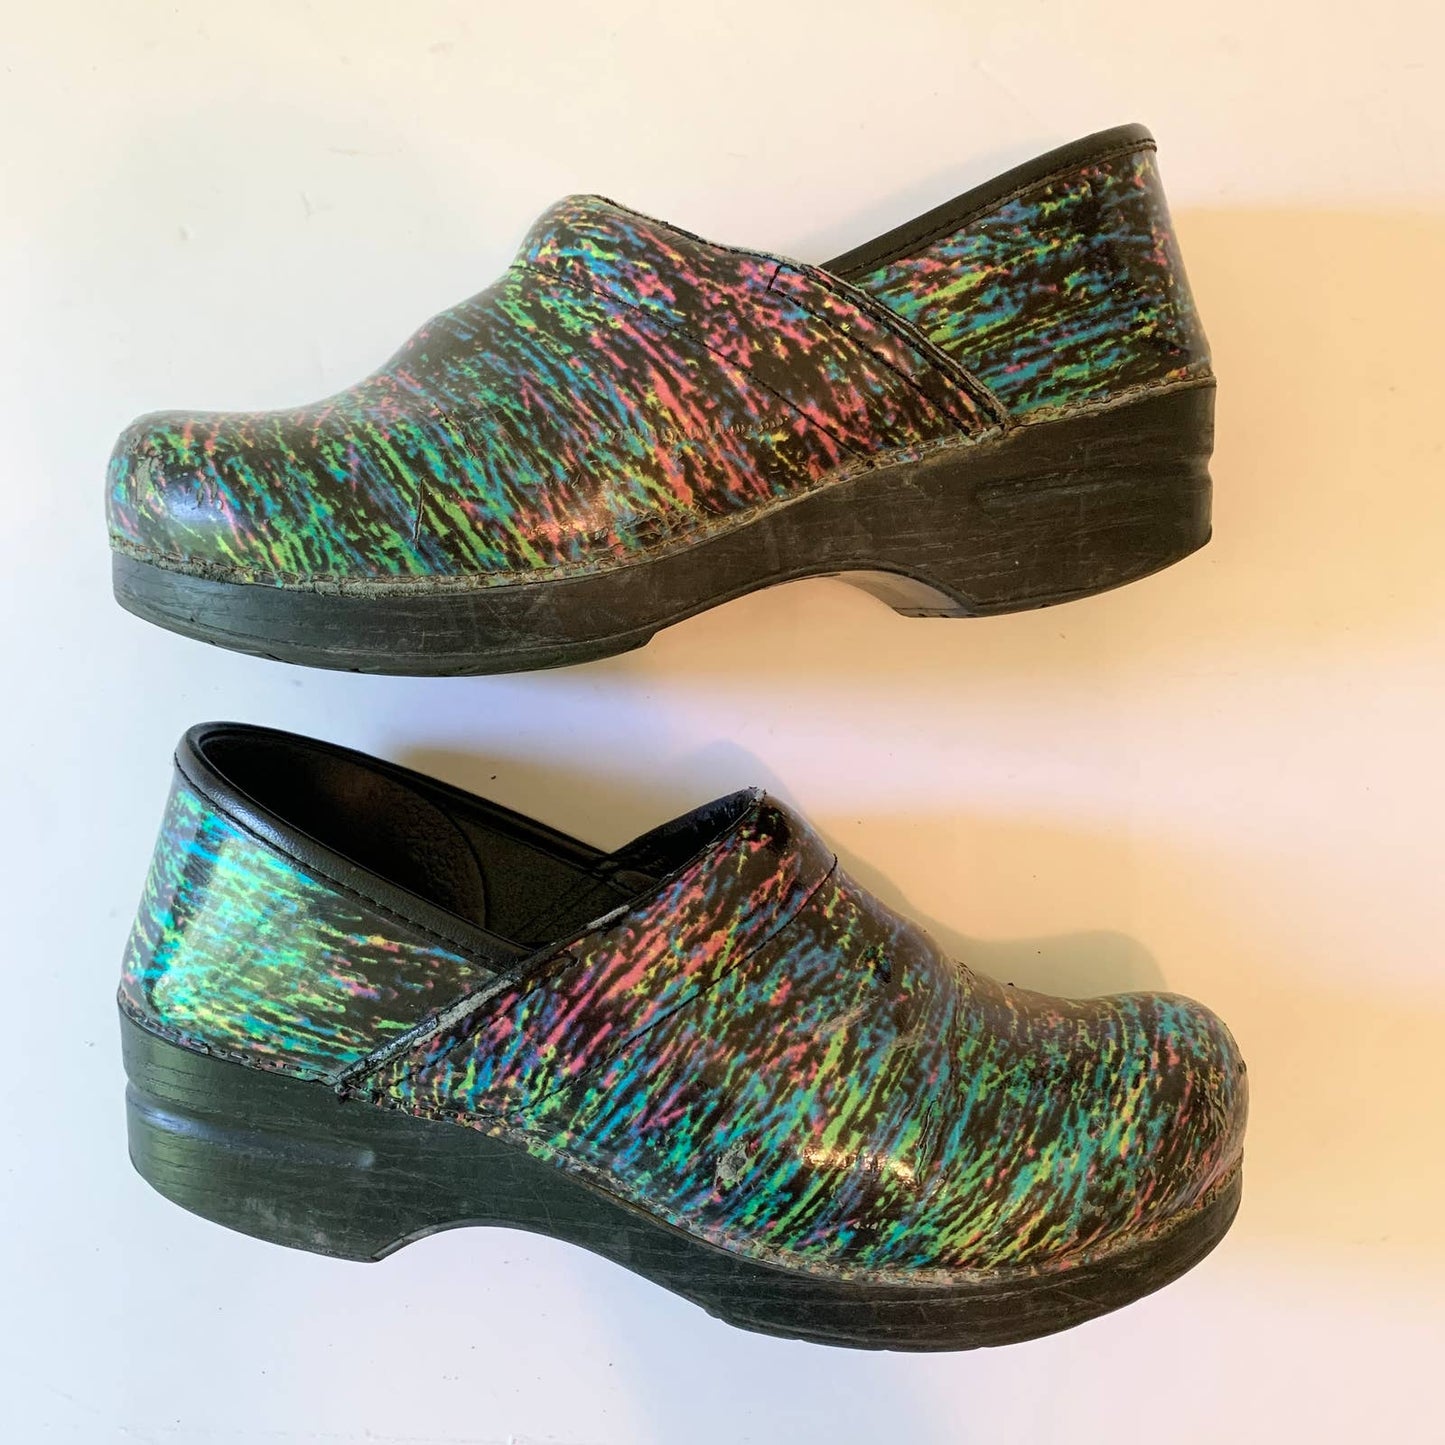 Dansko Limited Edition Highlighter Patent Professional Mule Clogs Shoes 40